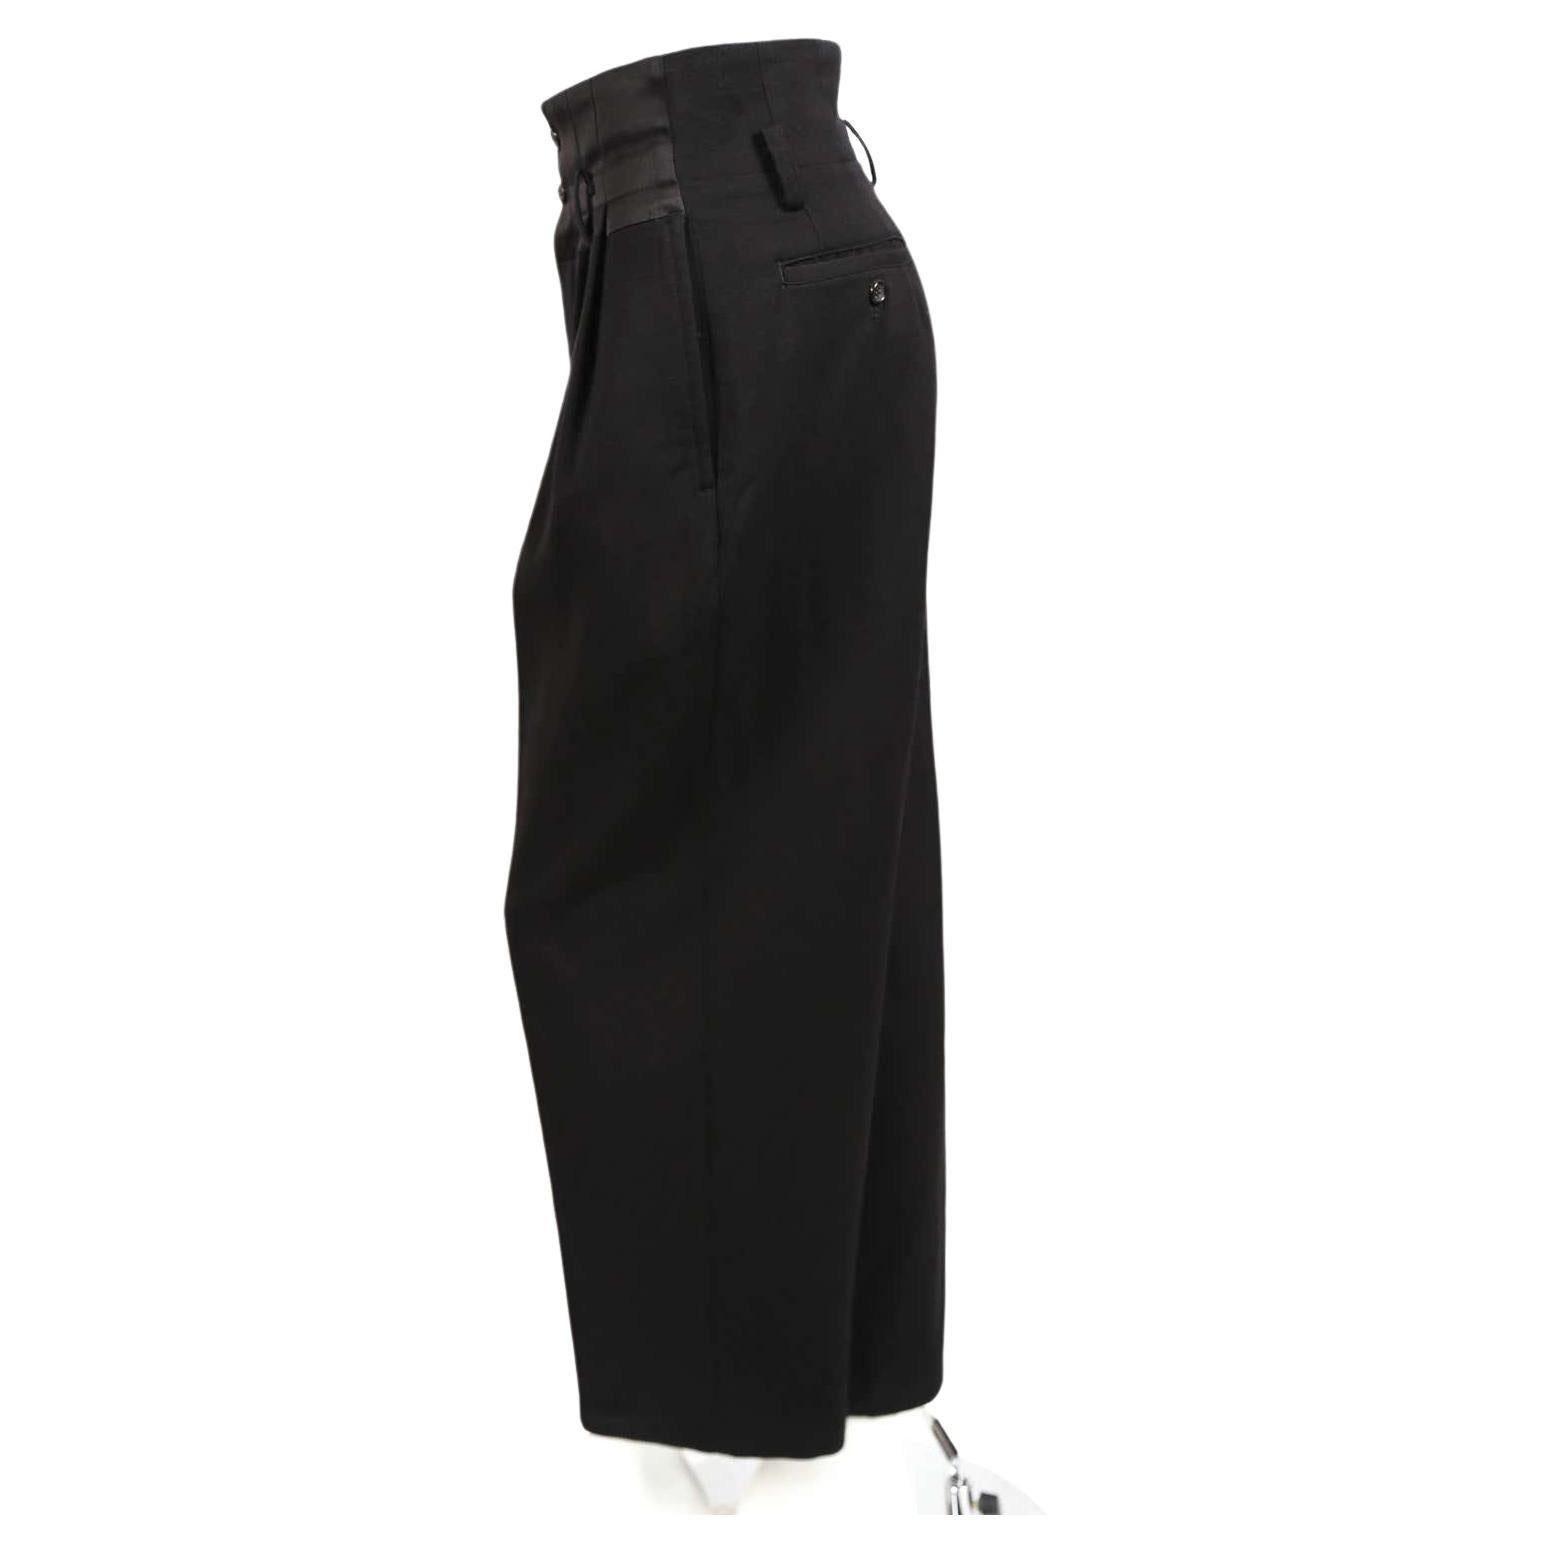 Jet-black, pleated, wool pants with silk satin waistband designed by Rei Kawakubo for Comme Des Garcons dating to 1988. Size 'S'. Approximate measurements: width of waistband at top 28